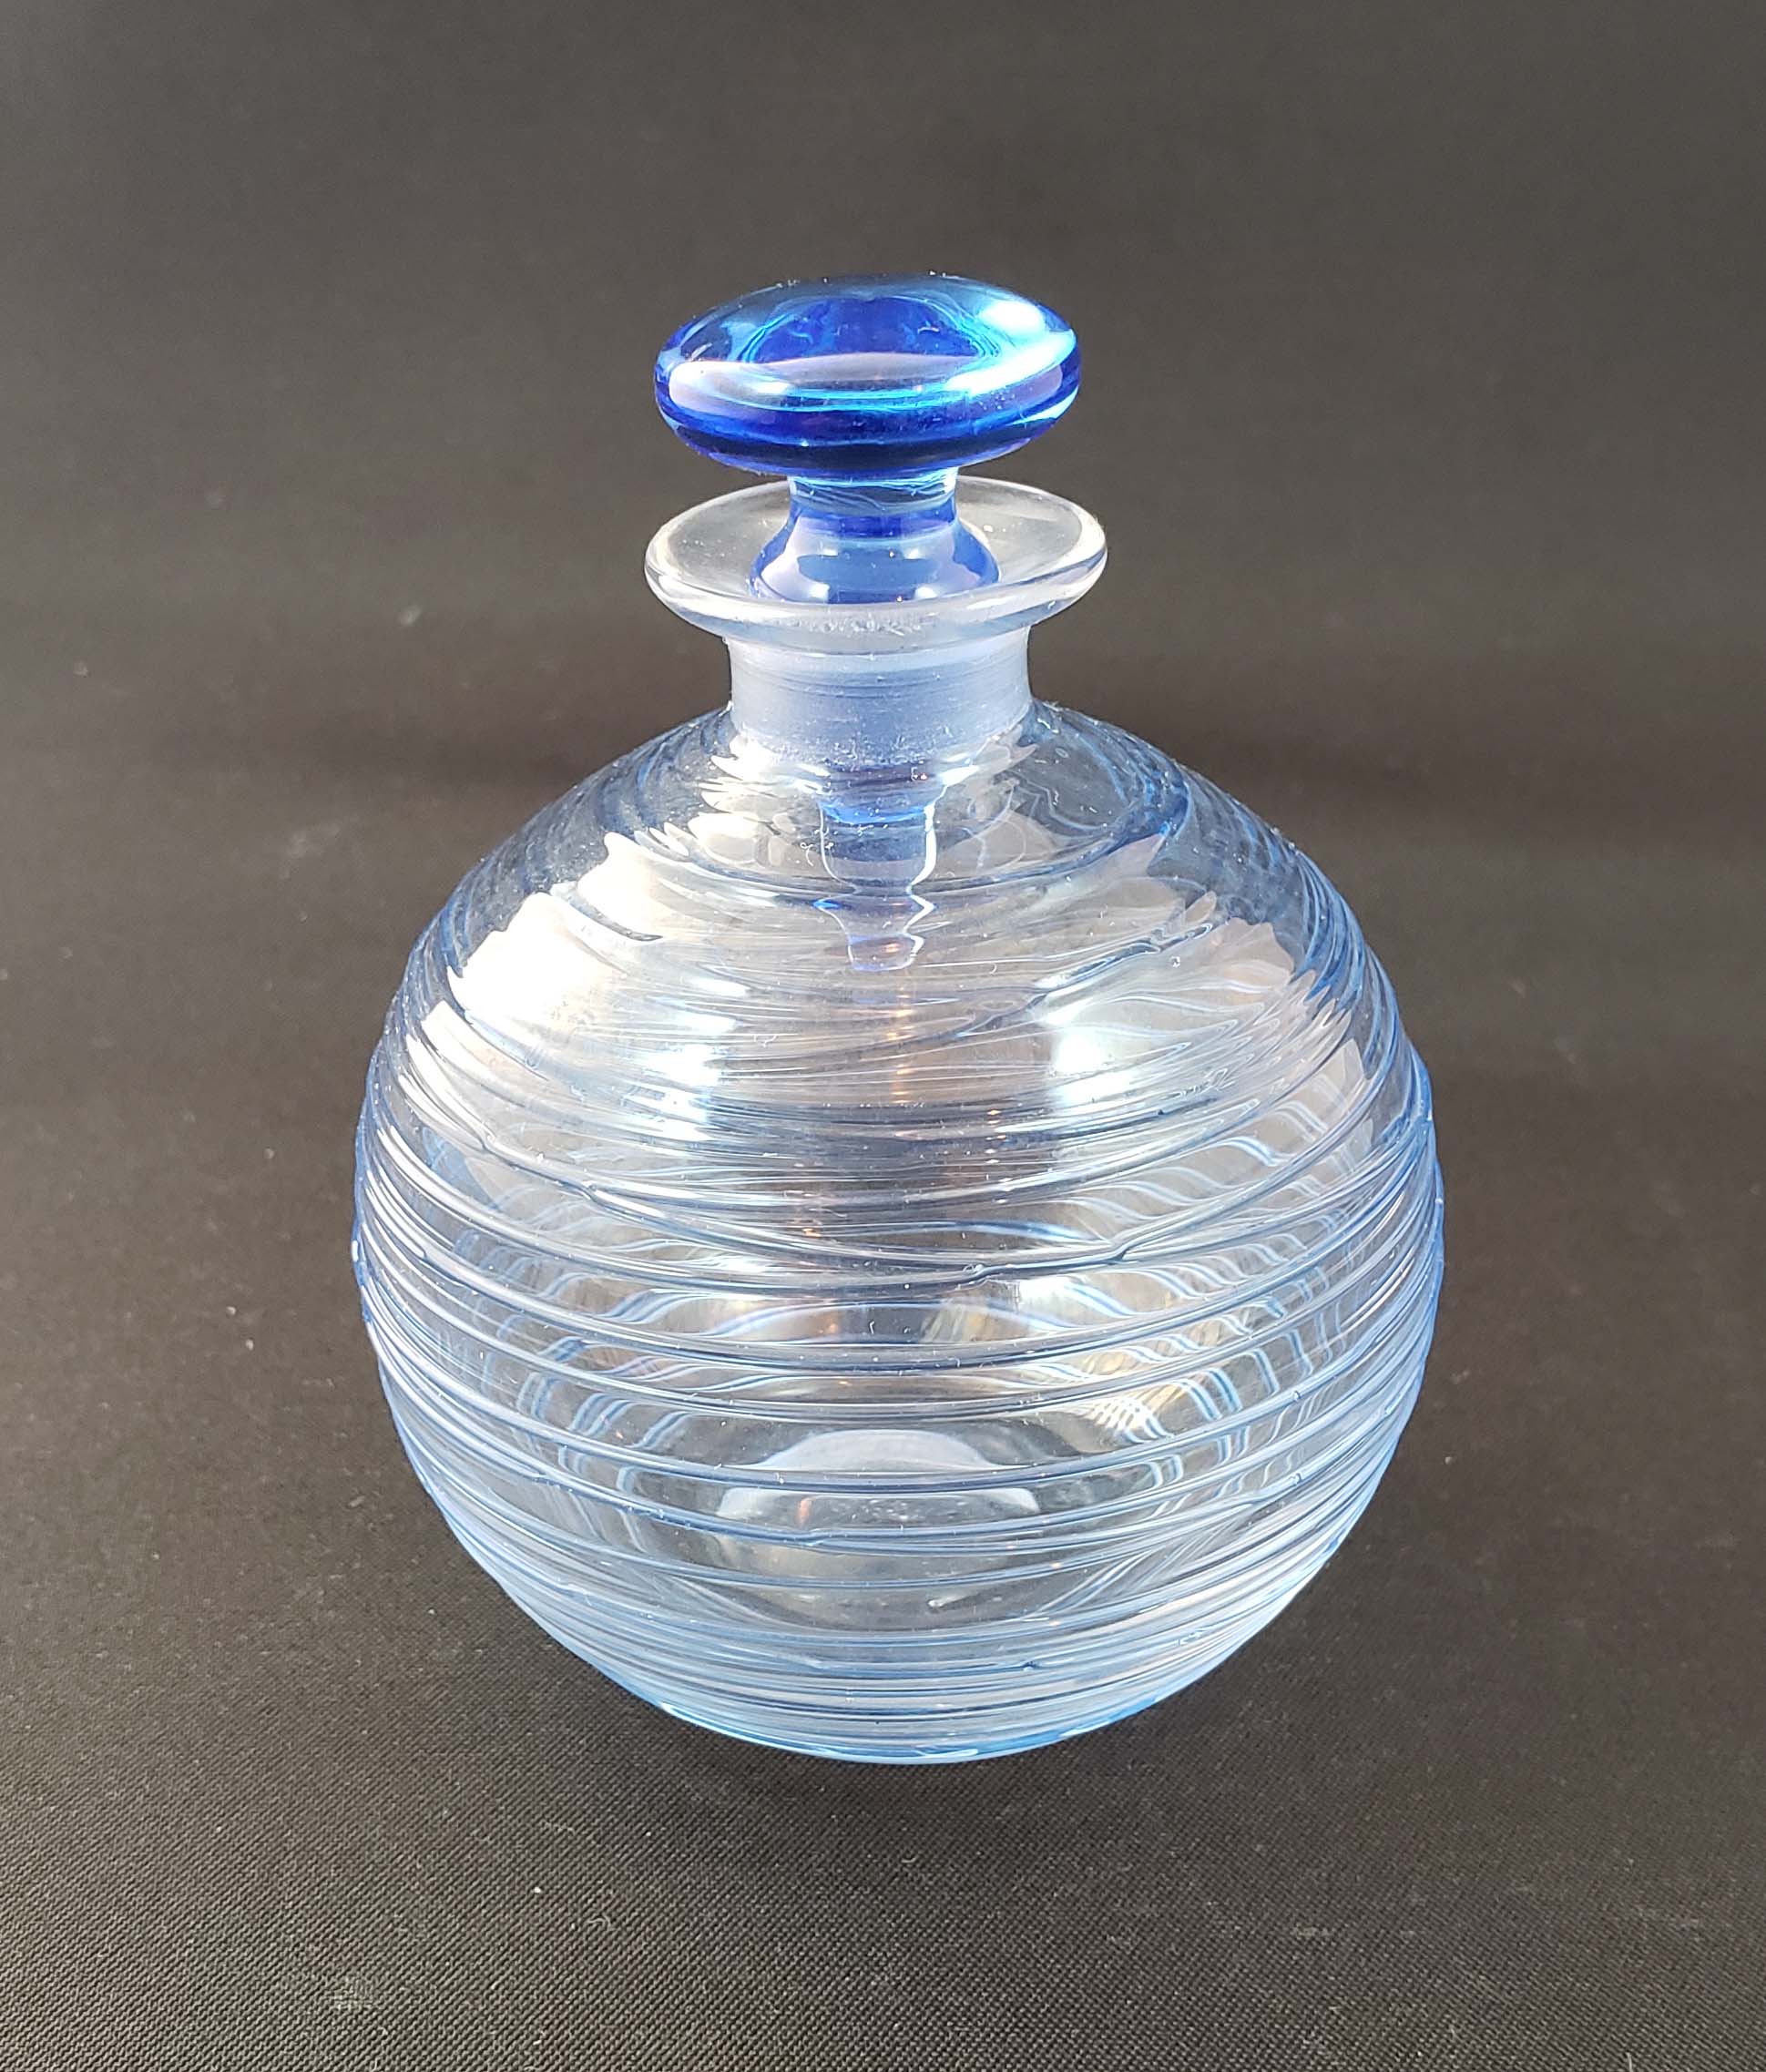 Avenue Glass Gallery - Items For Sale